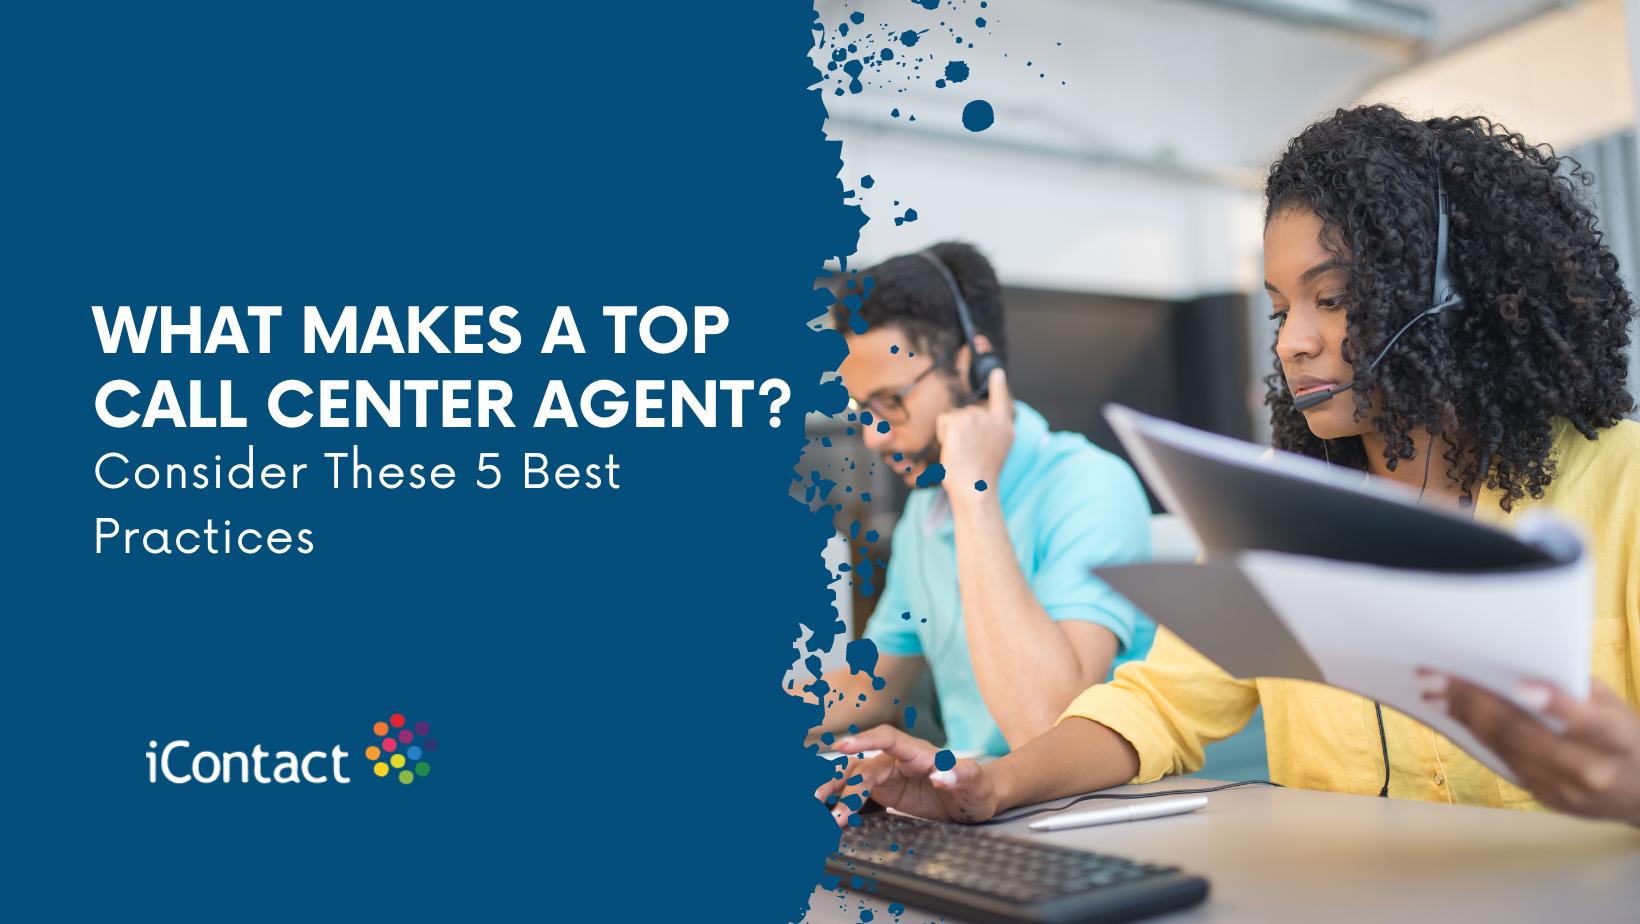 what makes a top call center agent and our 5 best practices with iContact BPO